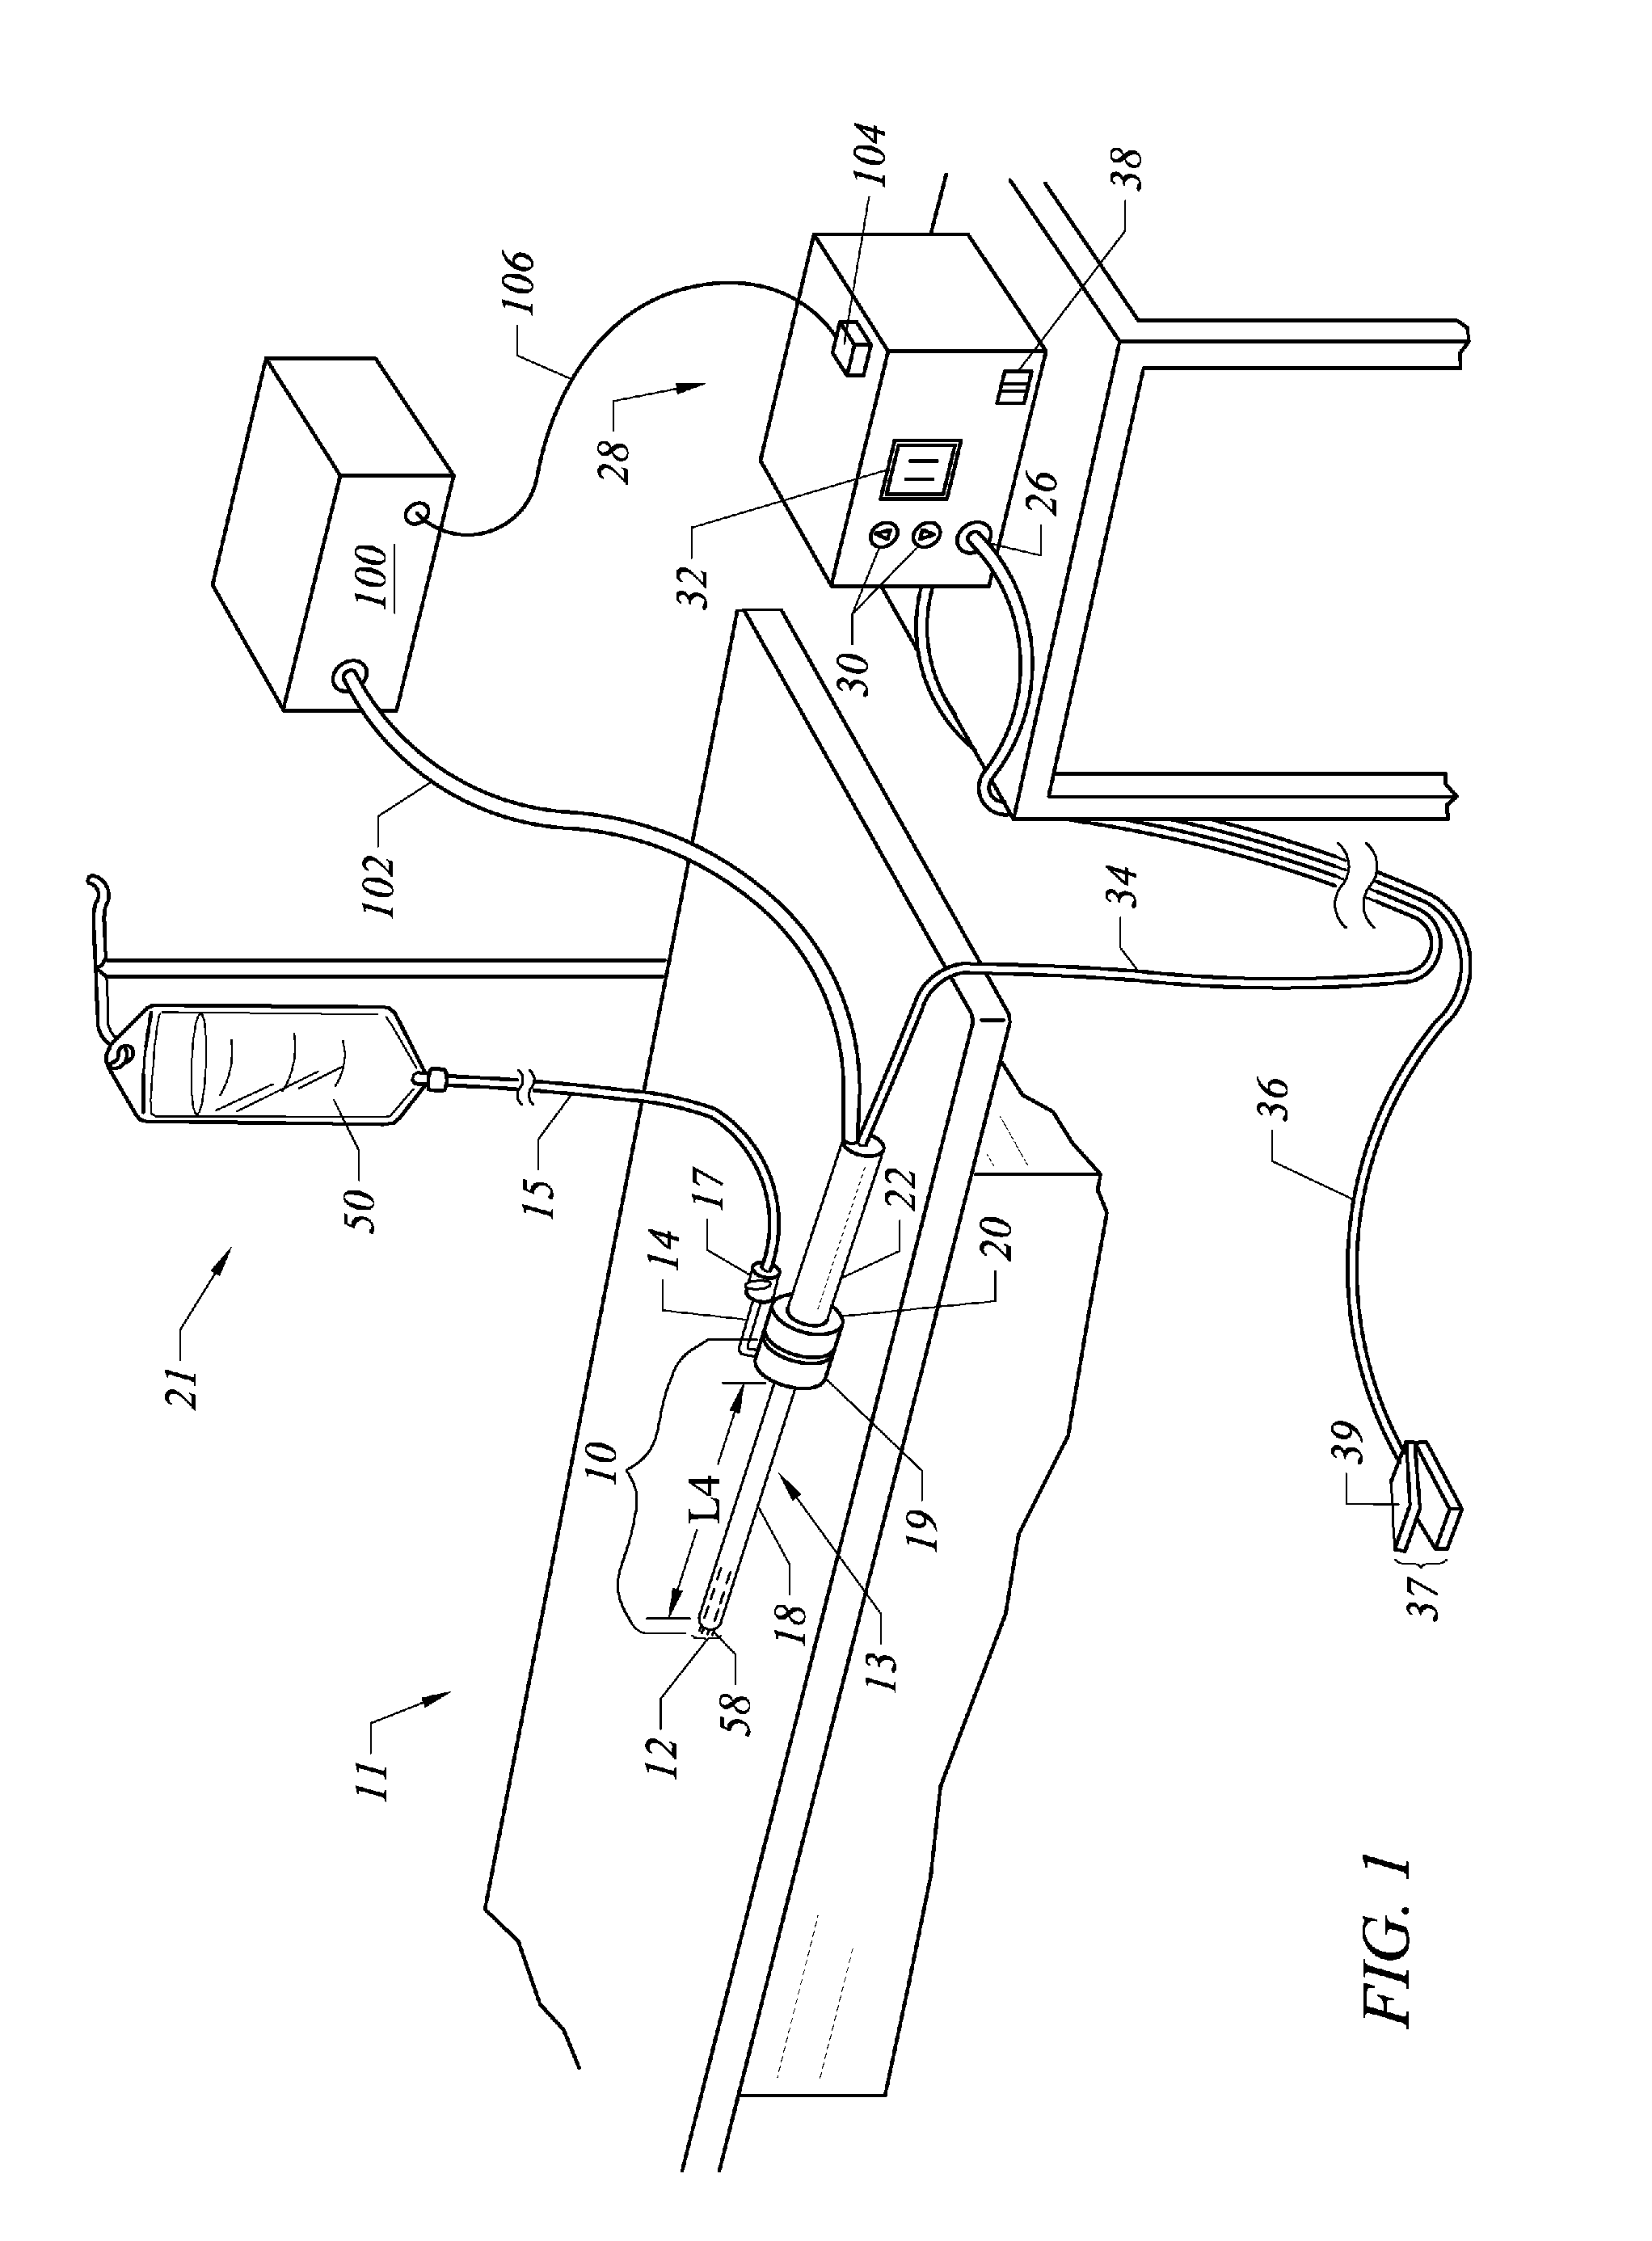 Electrosurgical system with suction control apparatus, system and method